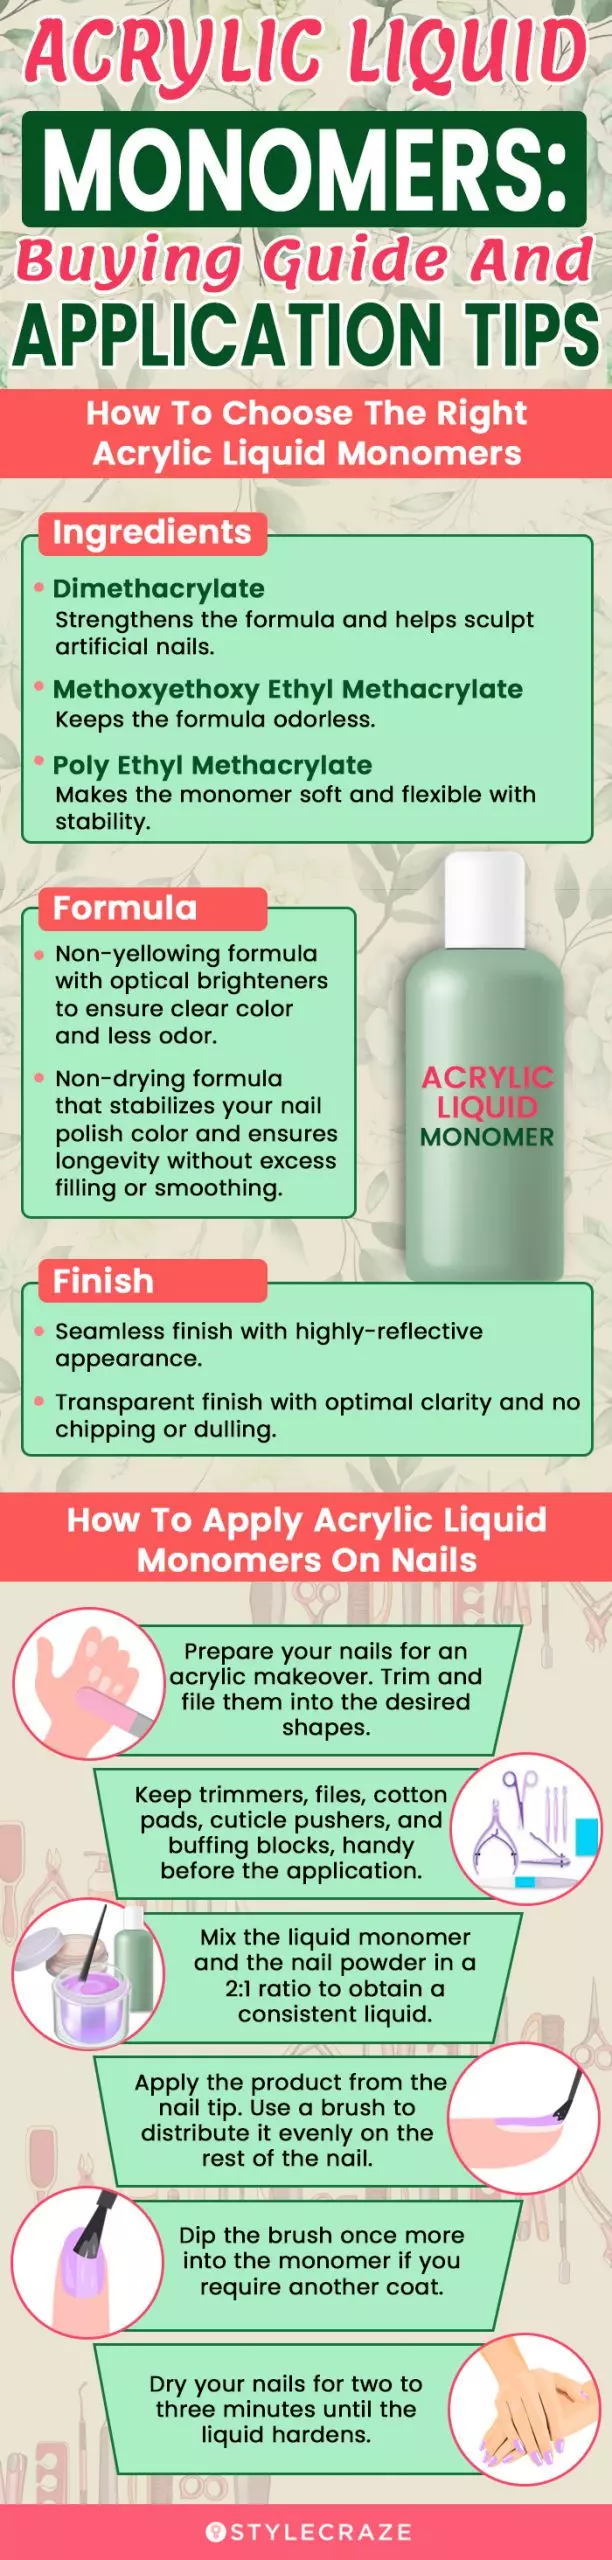 Acrylic Liquid Monomers: Buying Guide & Application Tips